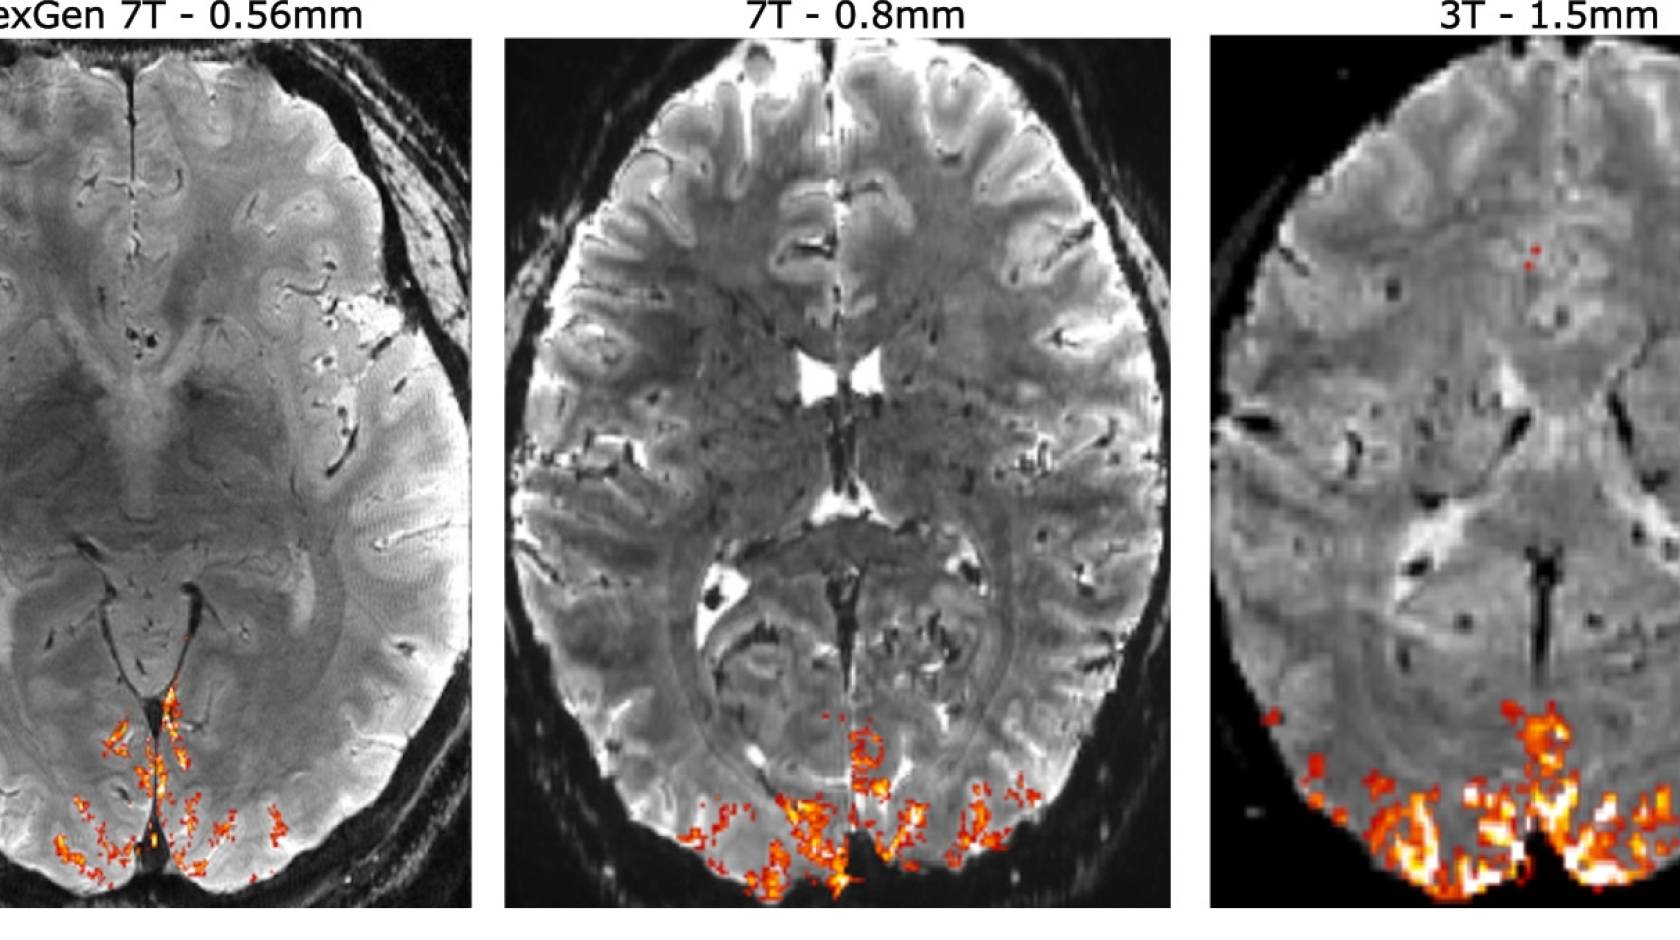 Three MRIs side by side with varying shades of orange at the bottom